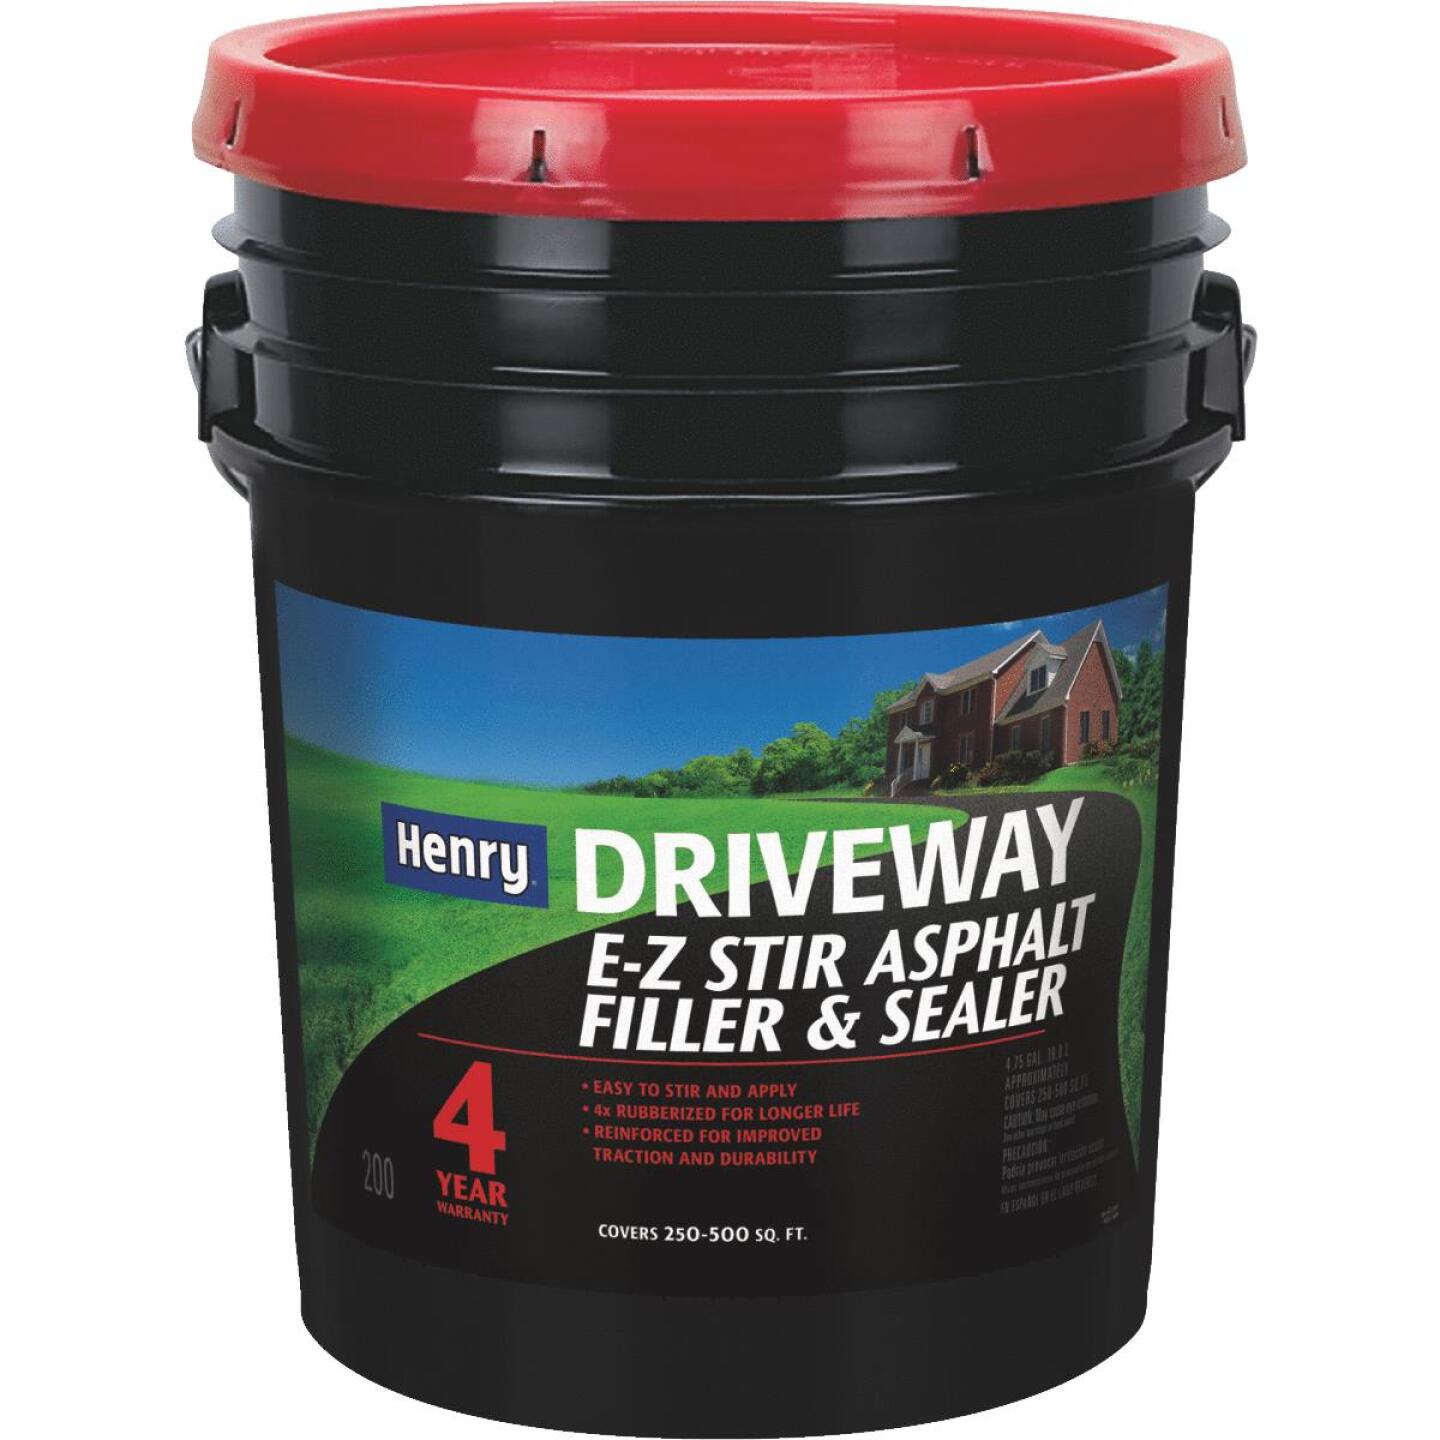 Henry, Henry 4.75 Gal. Blacktop Driveway Filler and Sealer, 4 Year